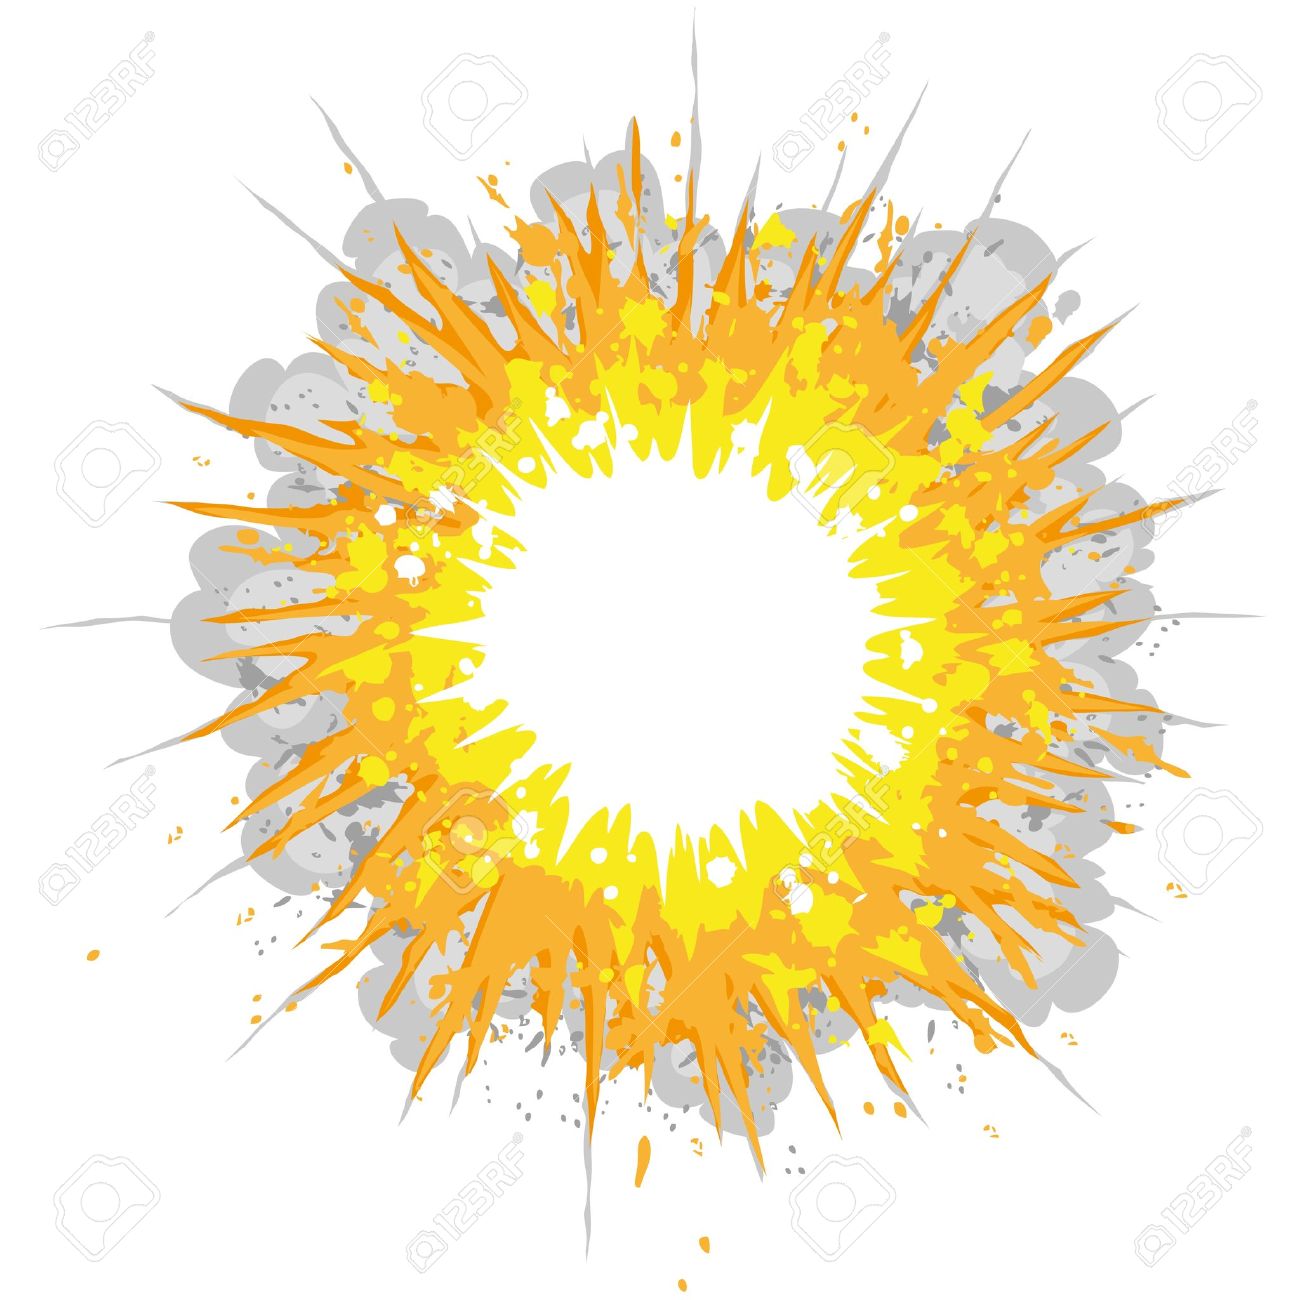 clipart explosion download - photo #33